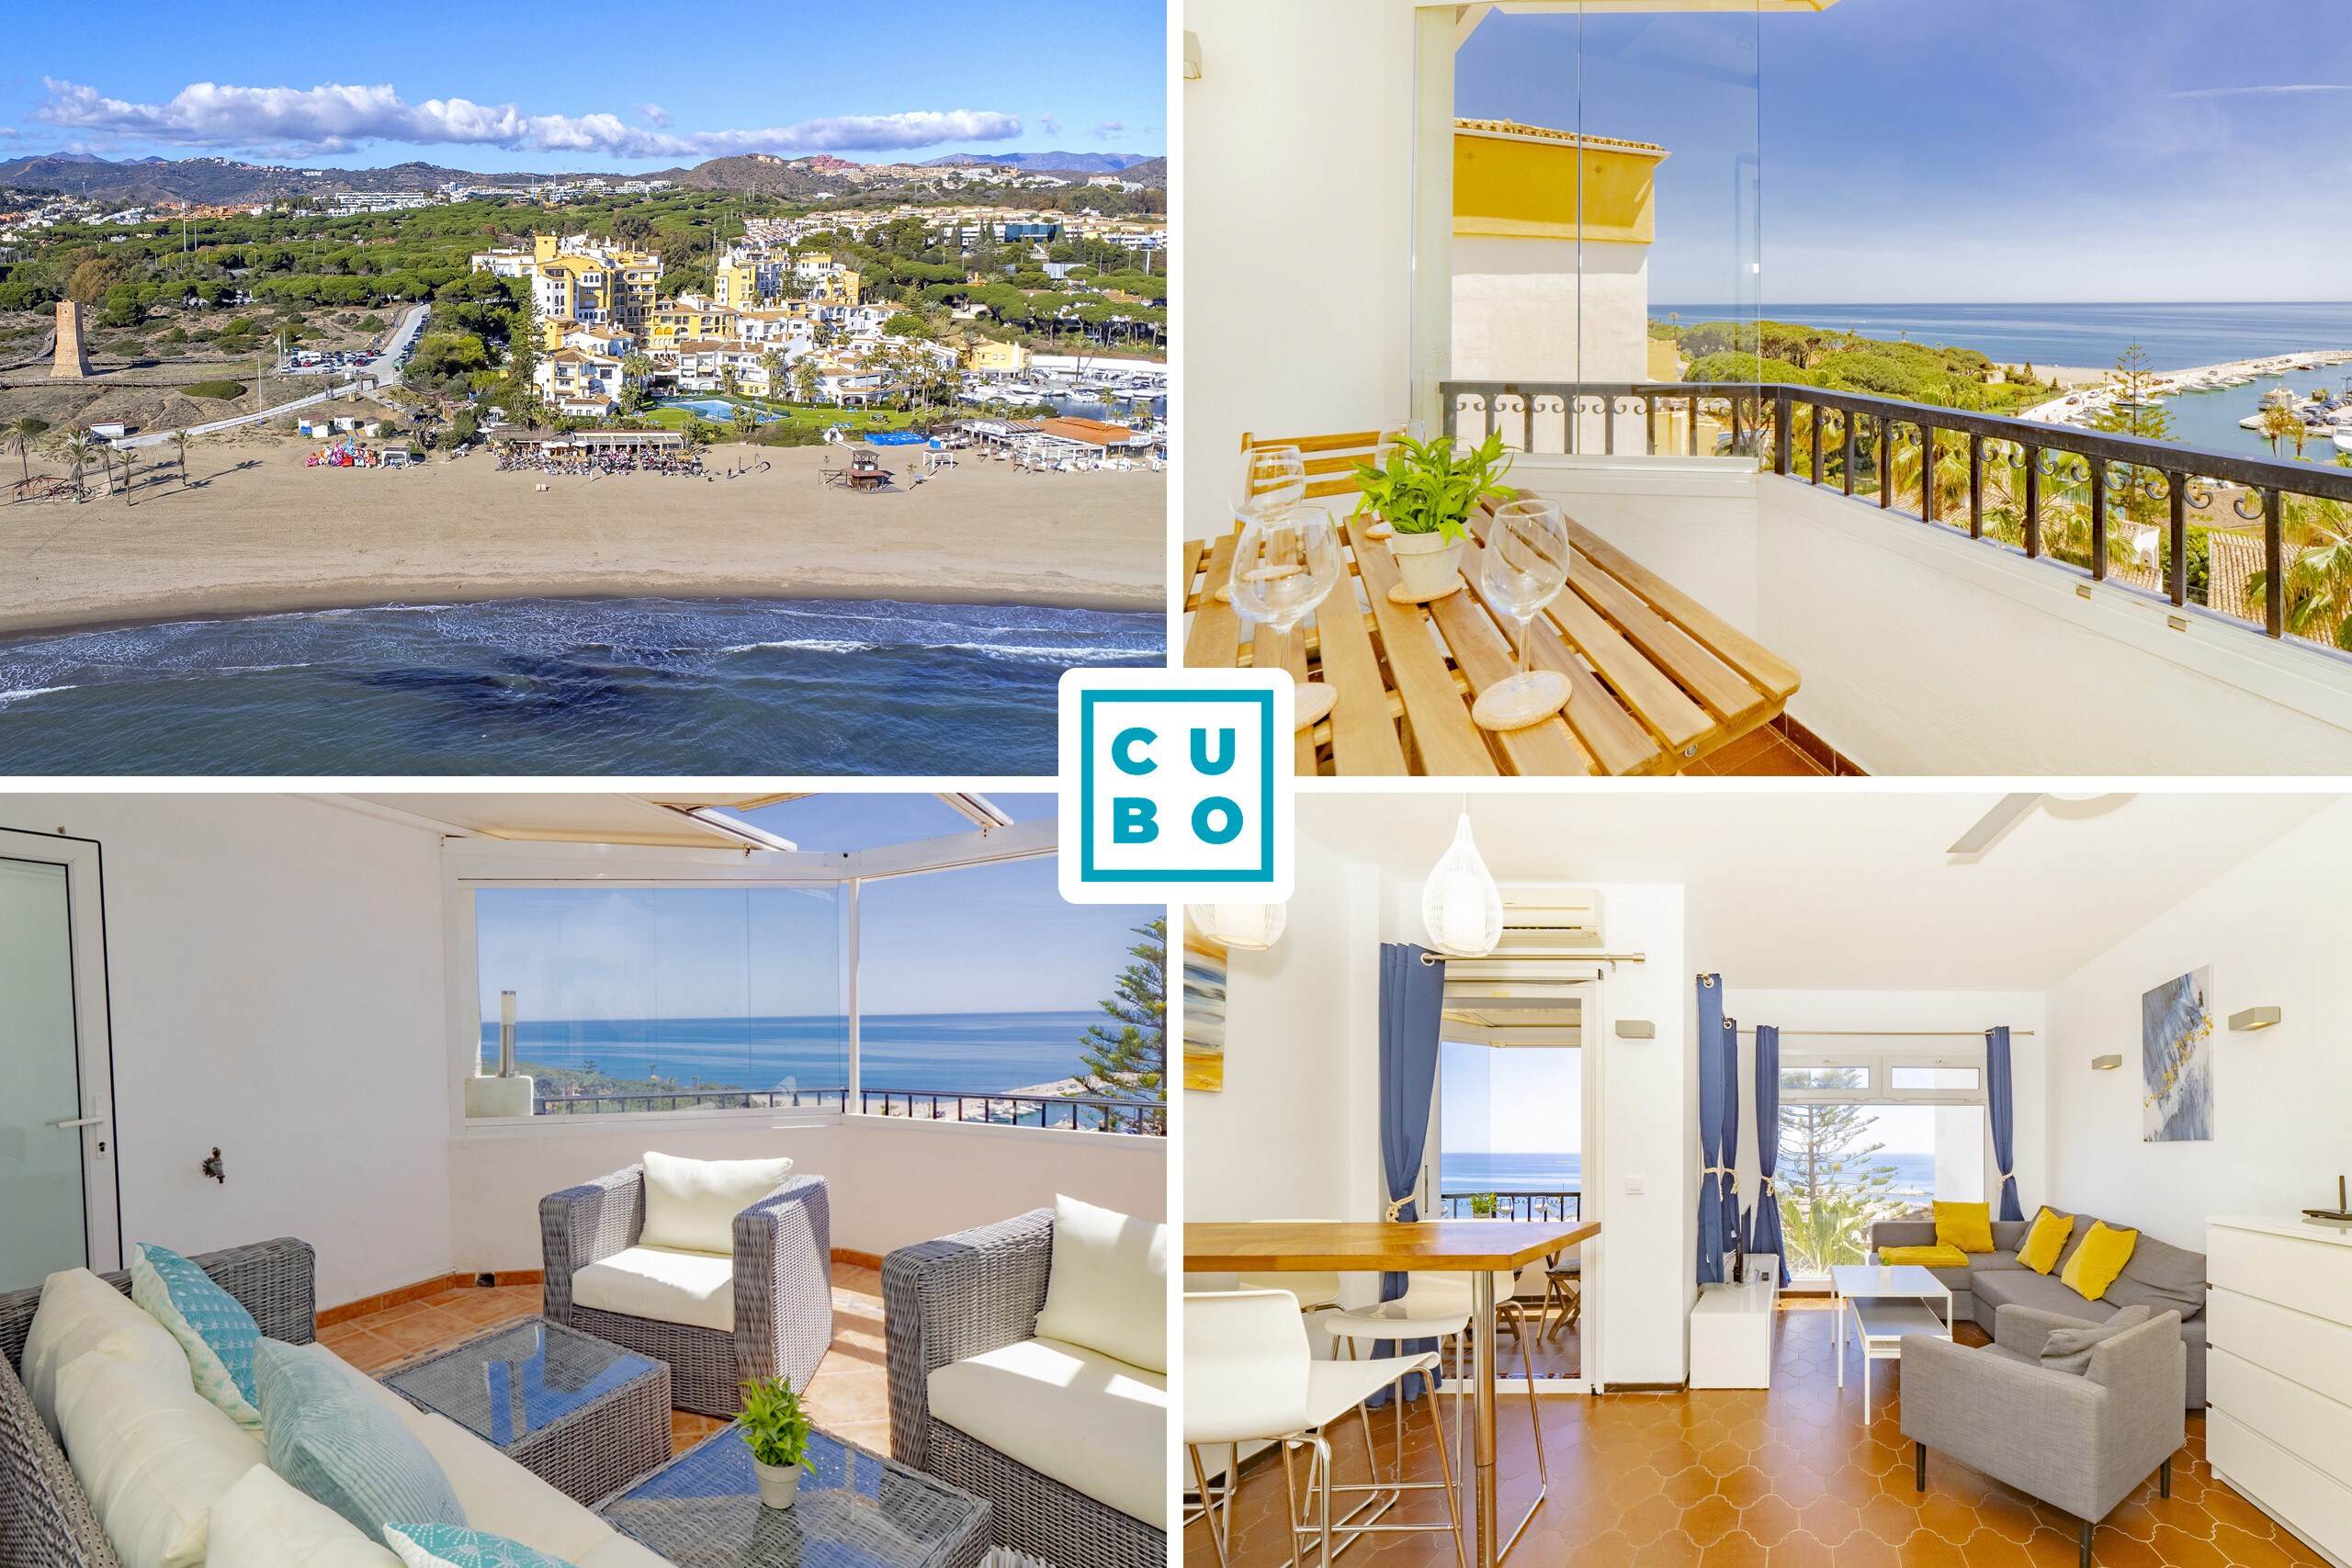 Holiday flat in Marbella with stunning sea views for 6 people.